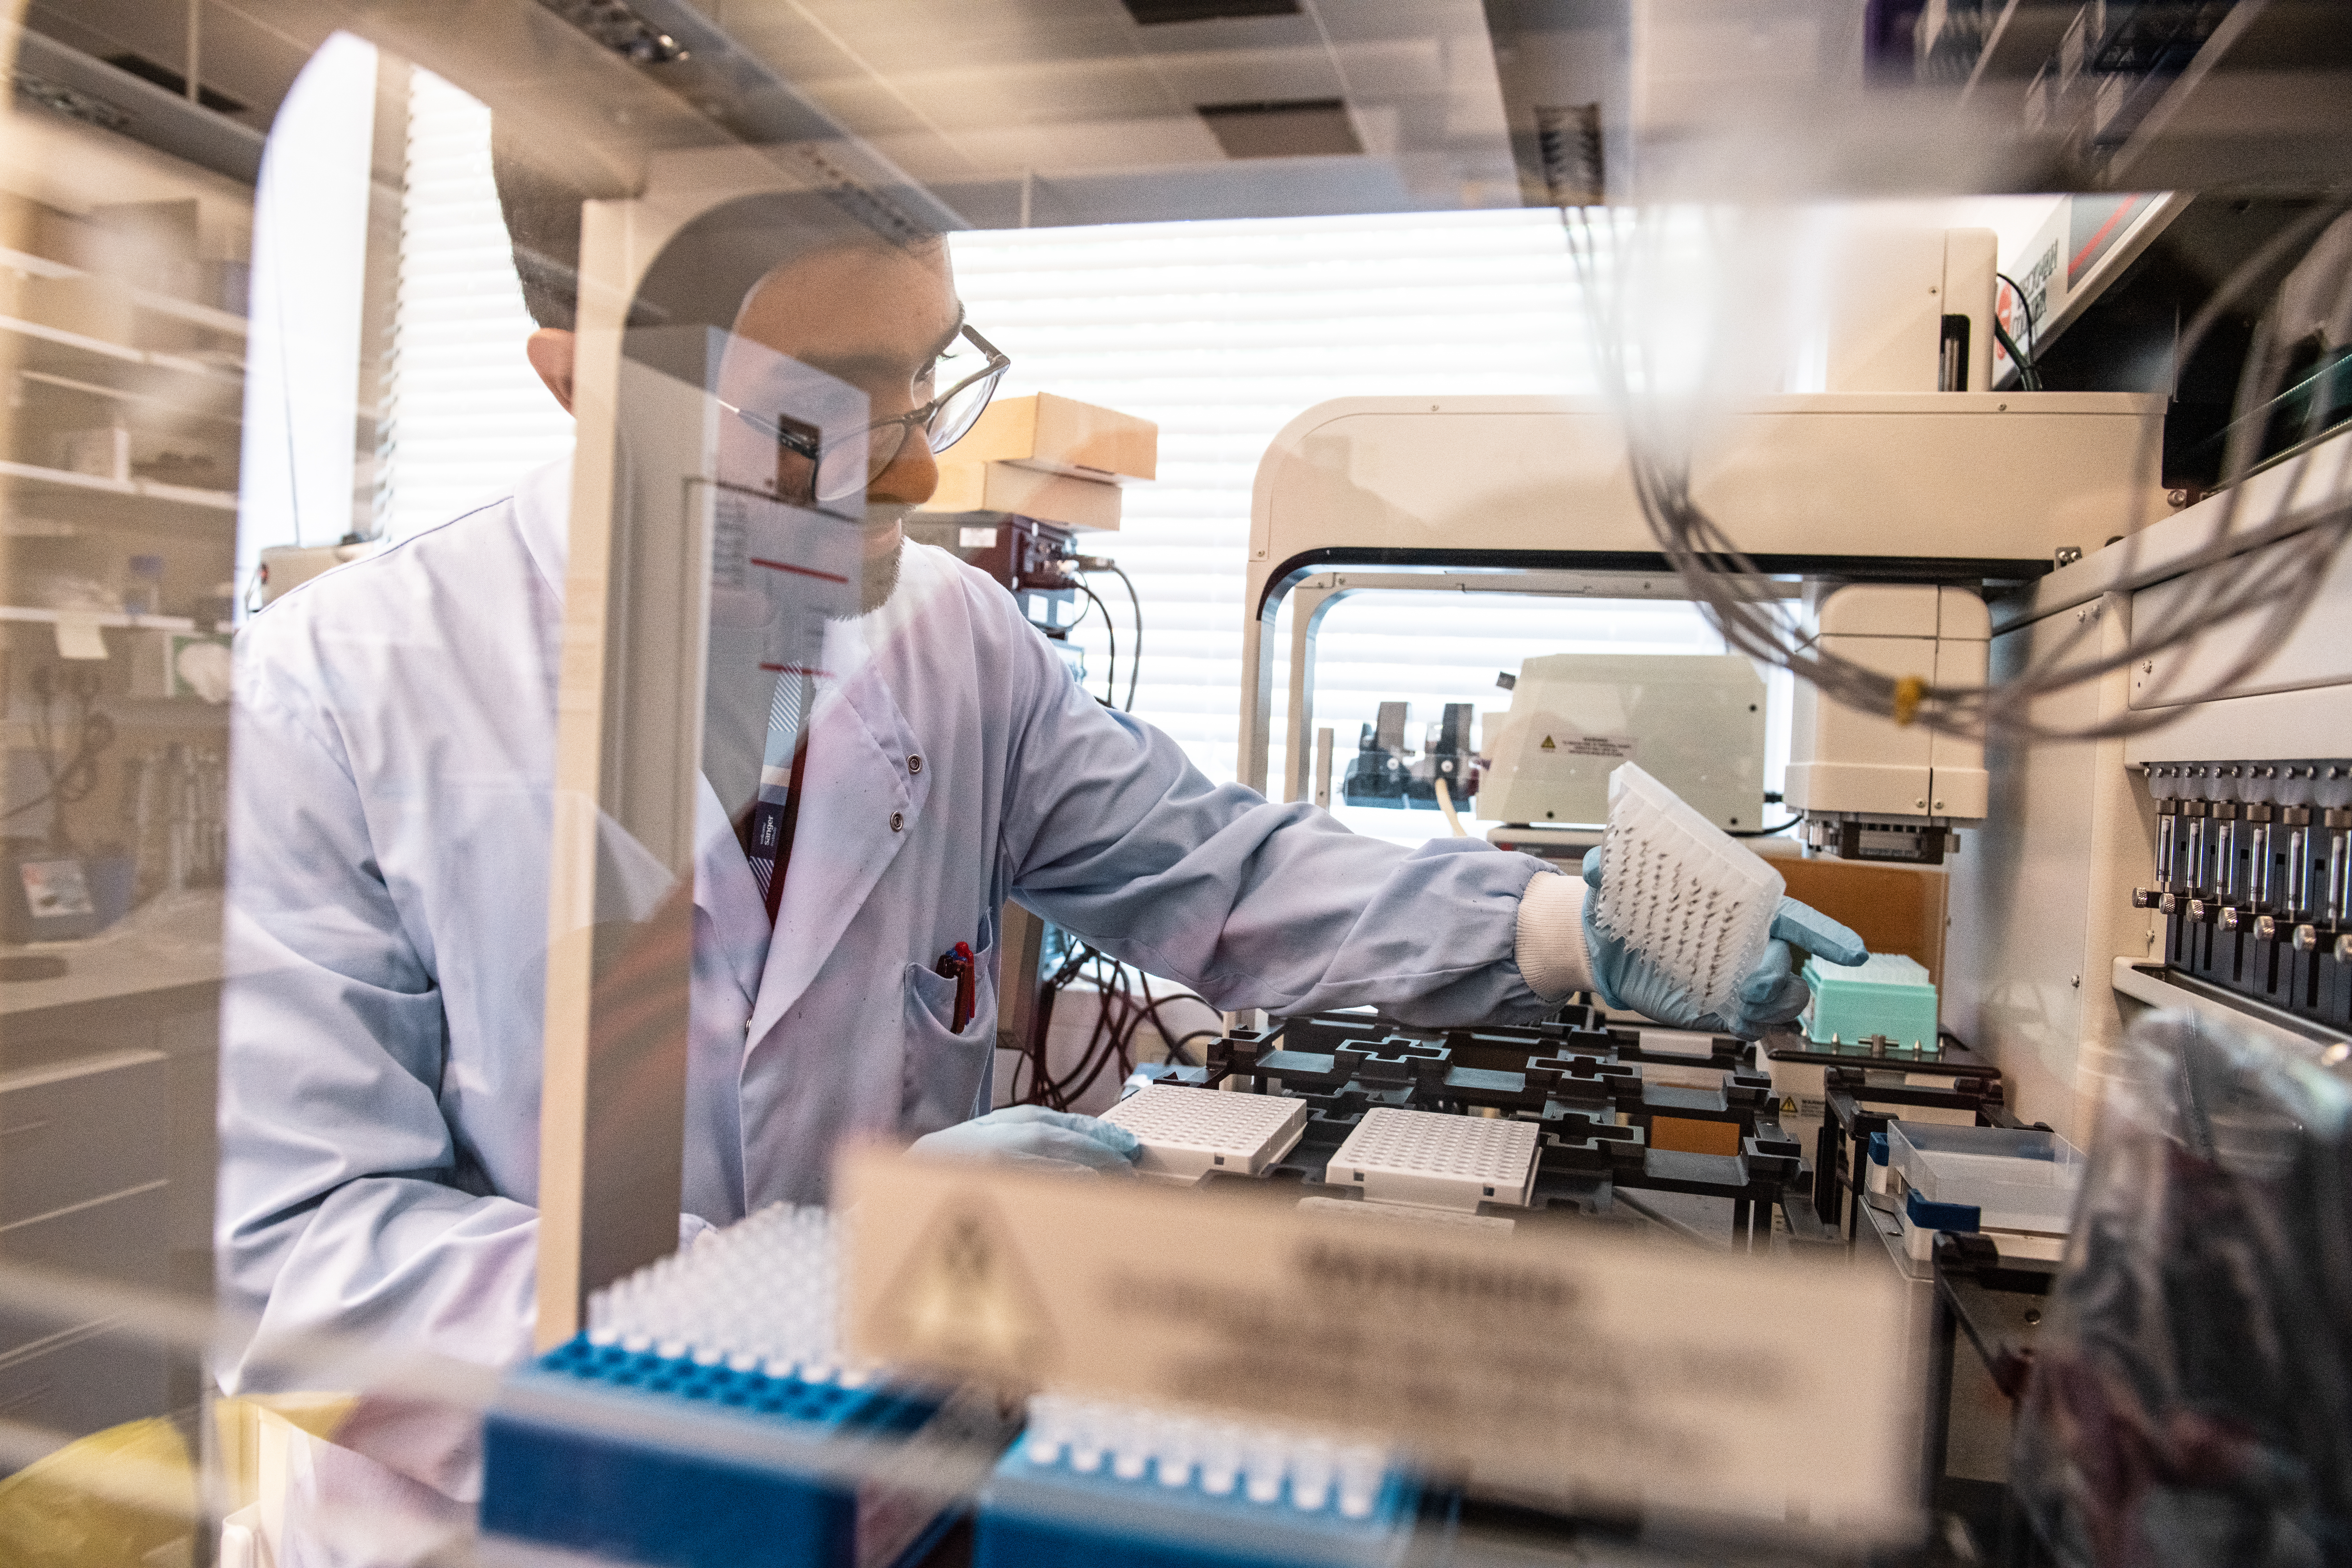 Abey Cherian, a lab assistant in the Genomic Surveillance Unit, is preparing mosquito samples for sequencing. The photograph is taken through the transparent window of a fume hood and Abey is wearing a white lab coat with blue gloves.